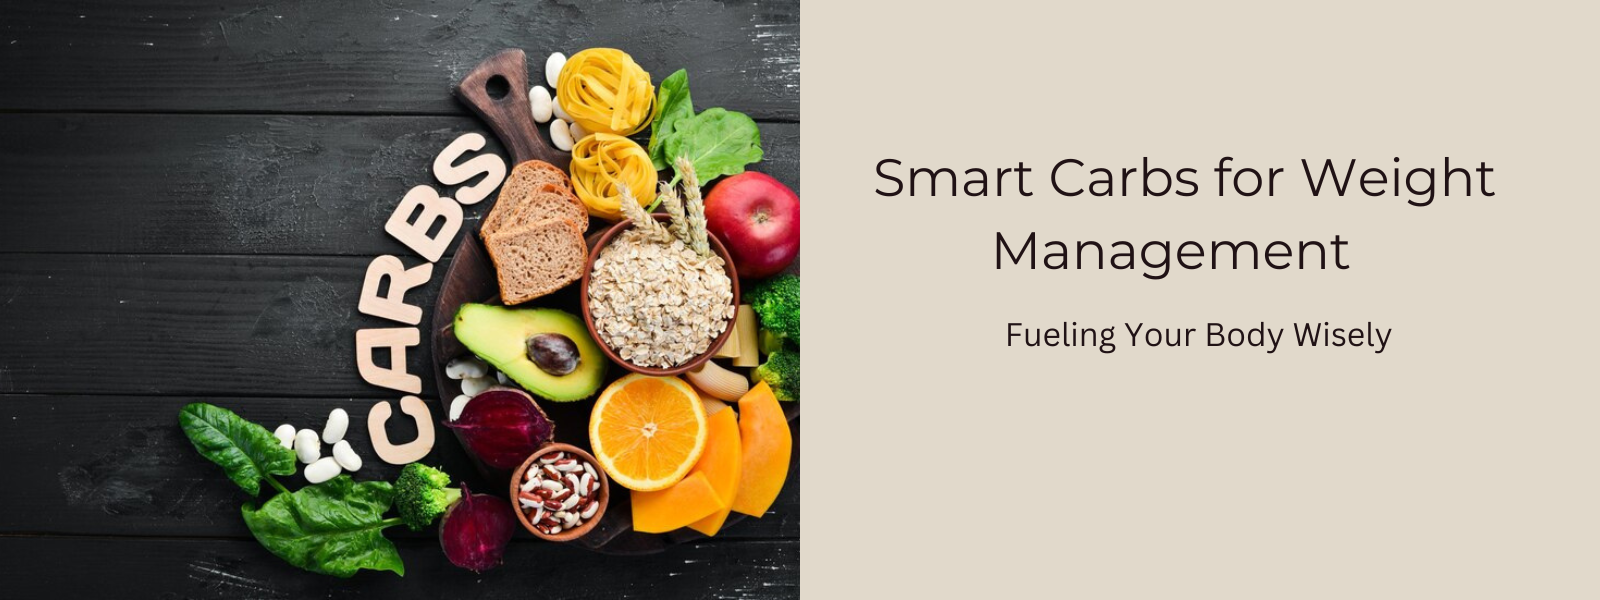 Smart Carbs for Weight Management: Fueling Your Body Wisely